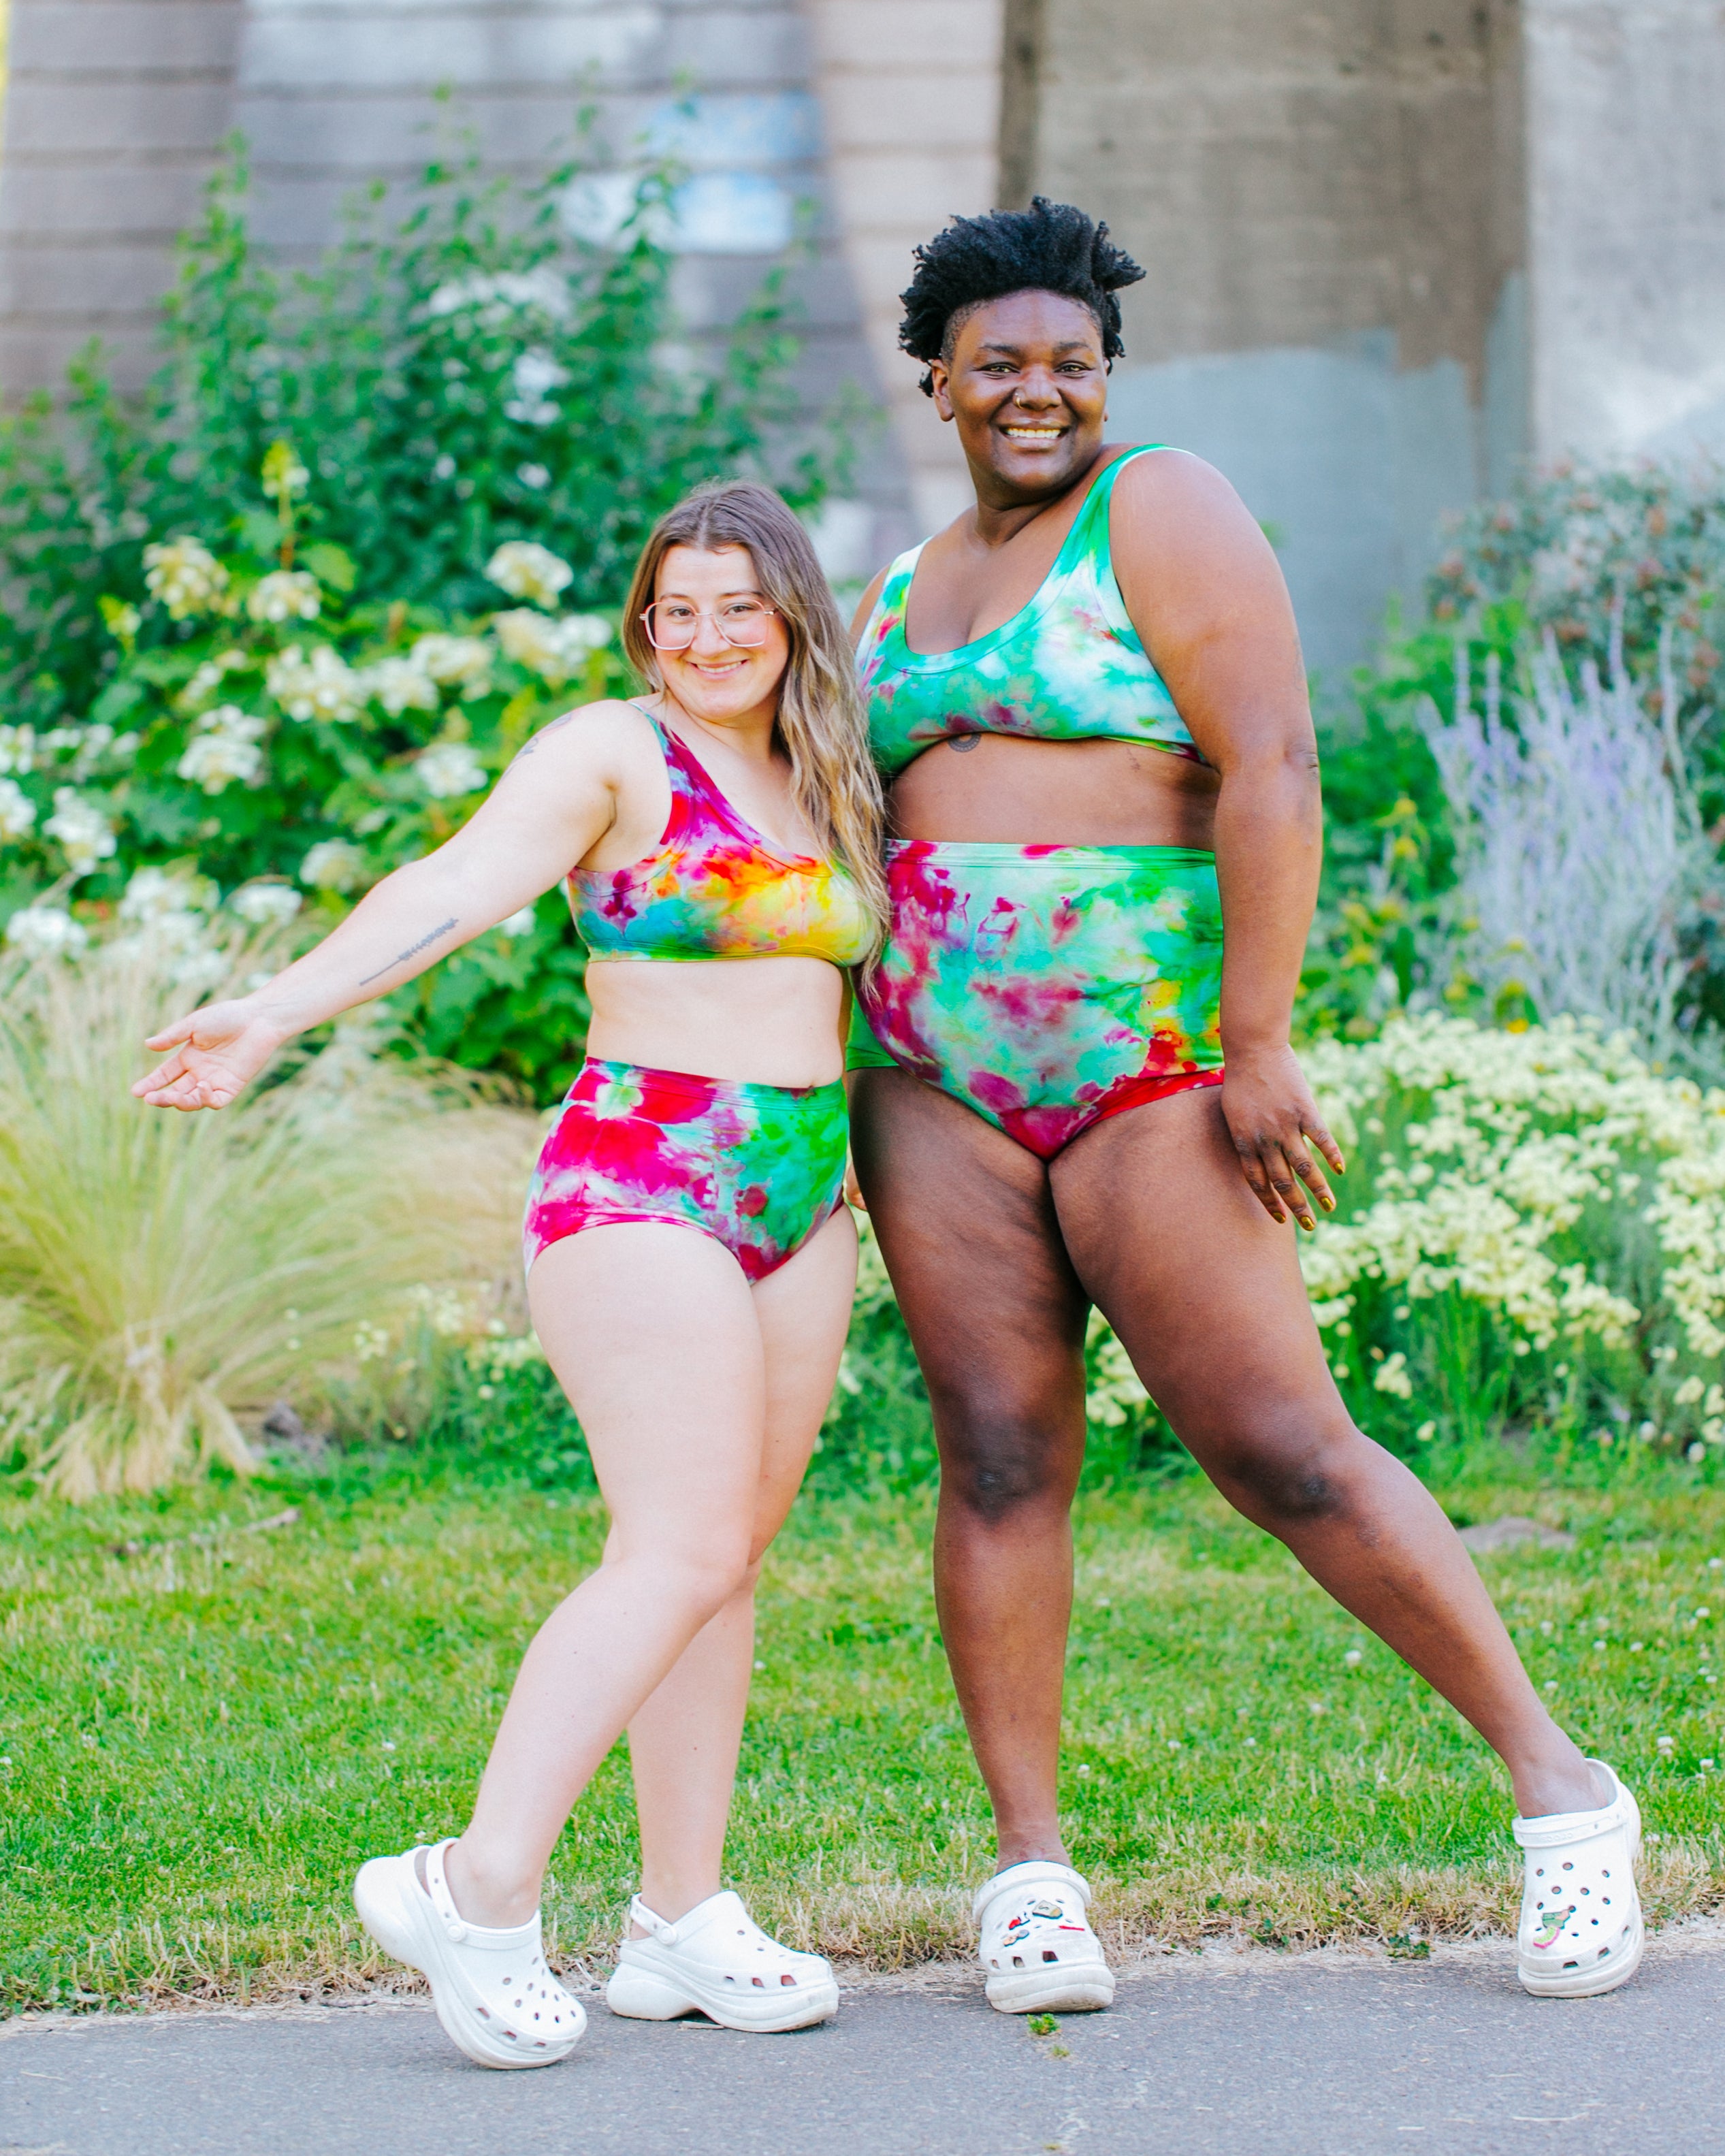 Two models smiling wearing sets of Ice Dye Sky Rise and Original style underwear and Bralettes in a mix of bright pink, yellow, green, and blue colors.